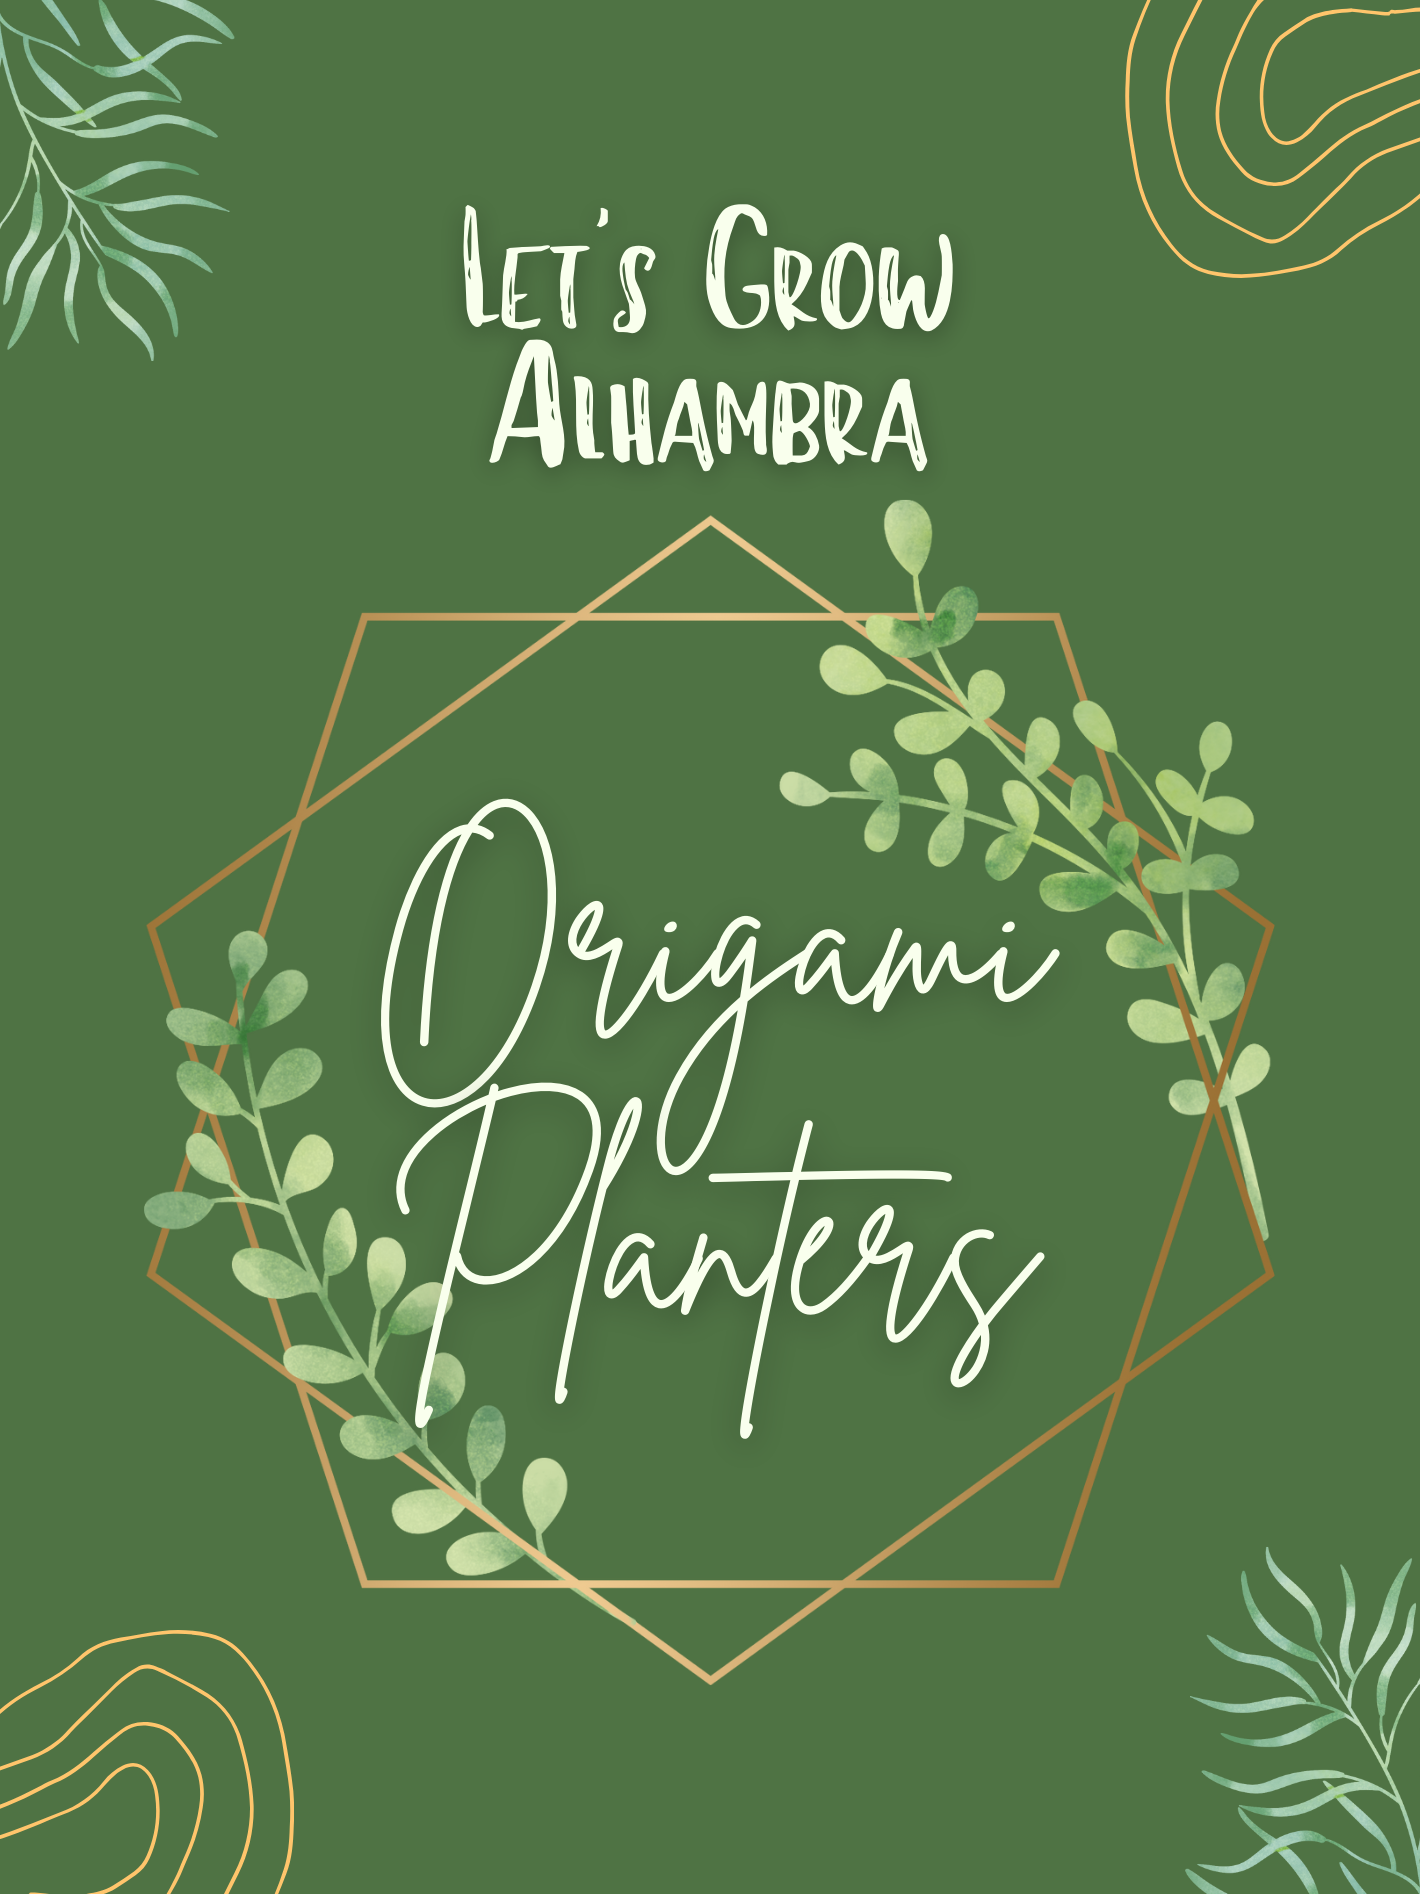 origami planters let's grow alhambra